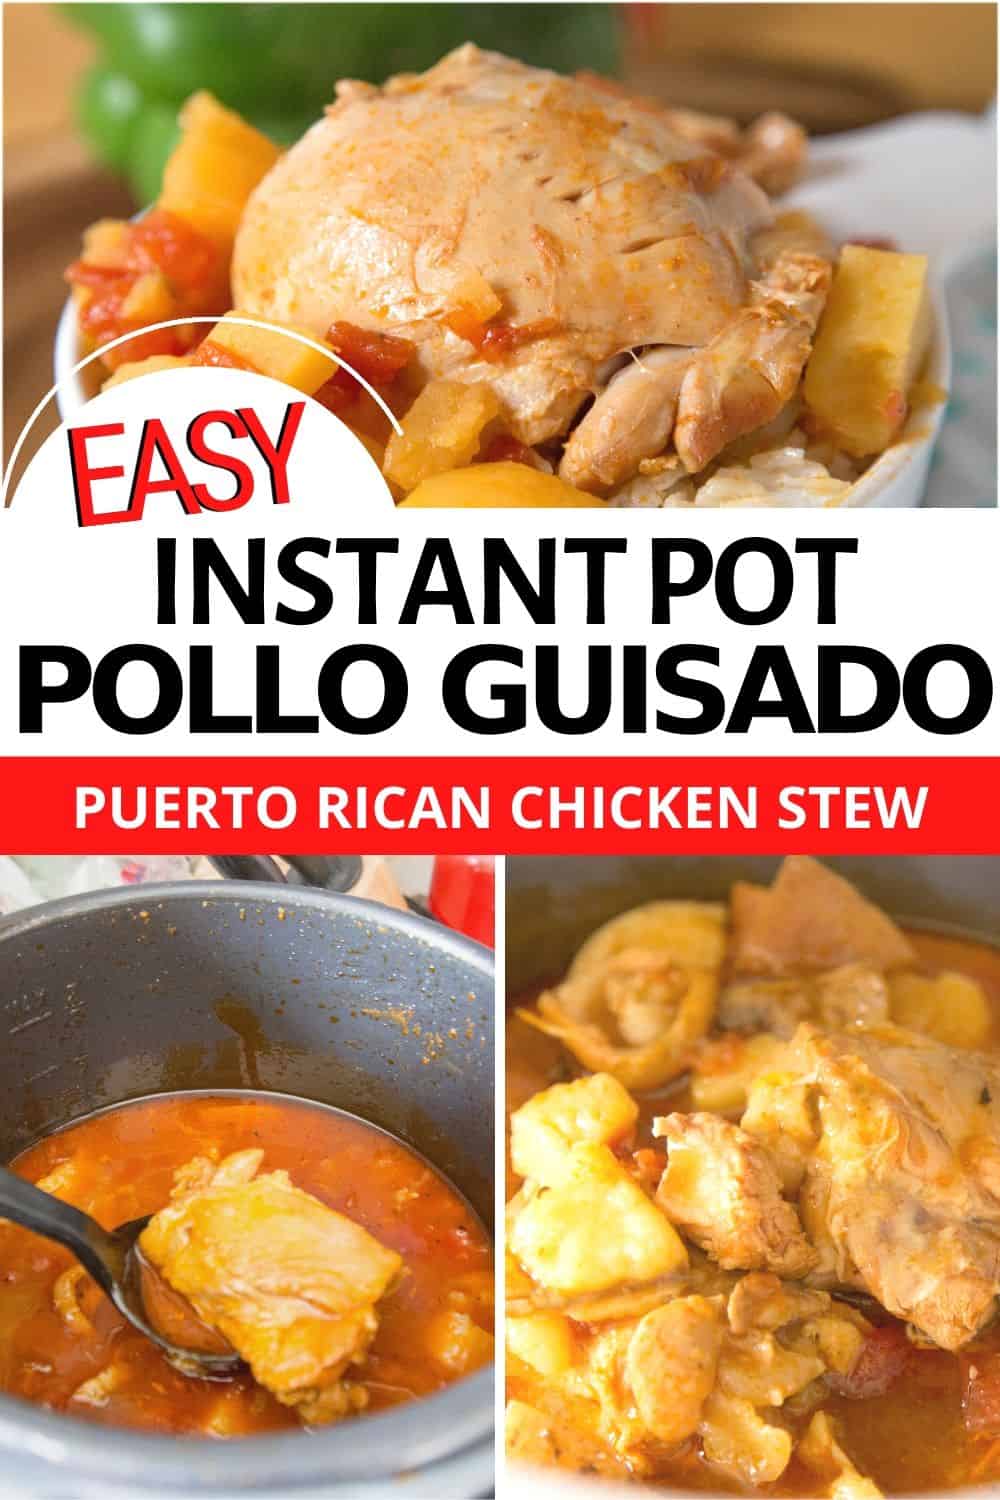 Learn how to create this delicious pollo guisado recipe using your Instant Pot! Puerto Rican chicken stew is so easy to make and taste just like home. via @mystayathome